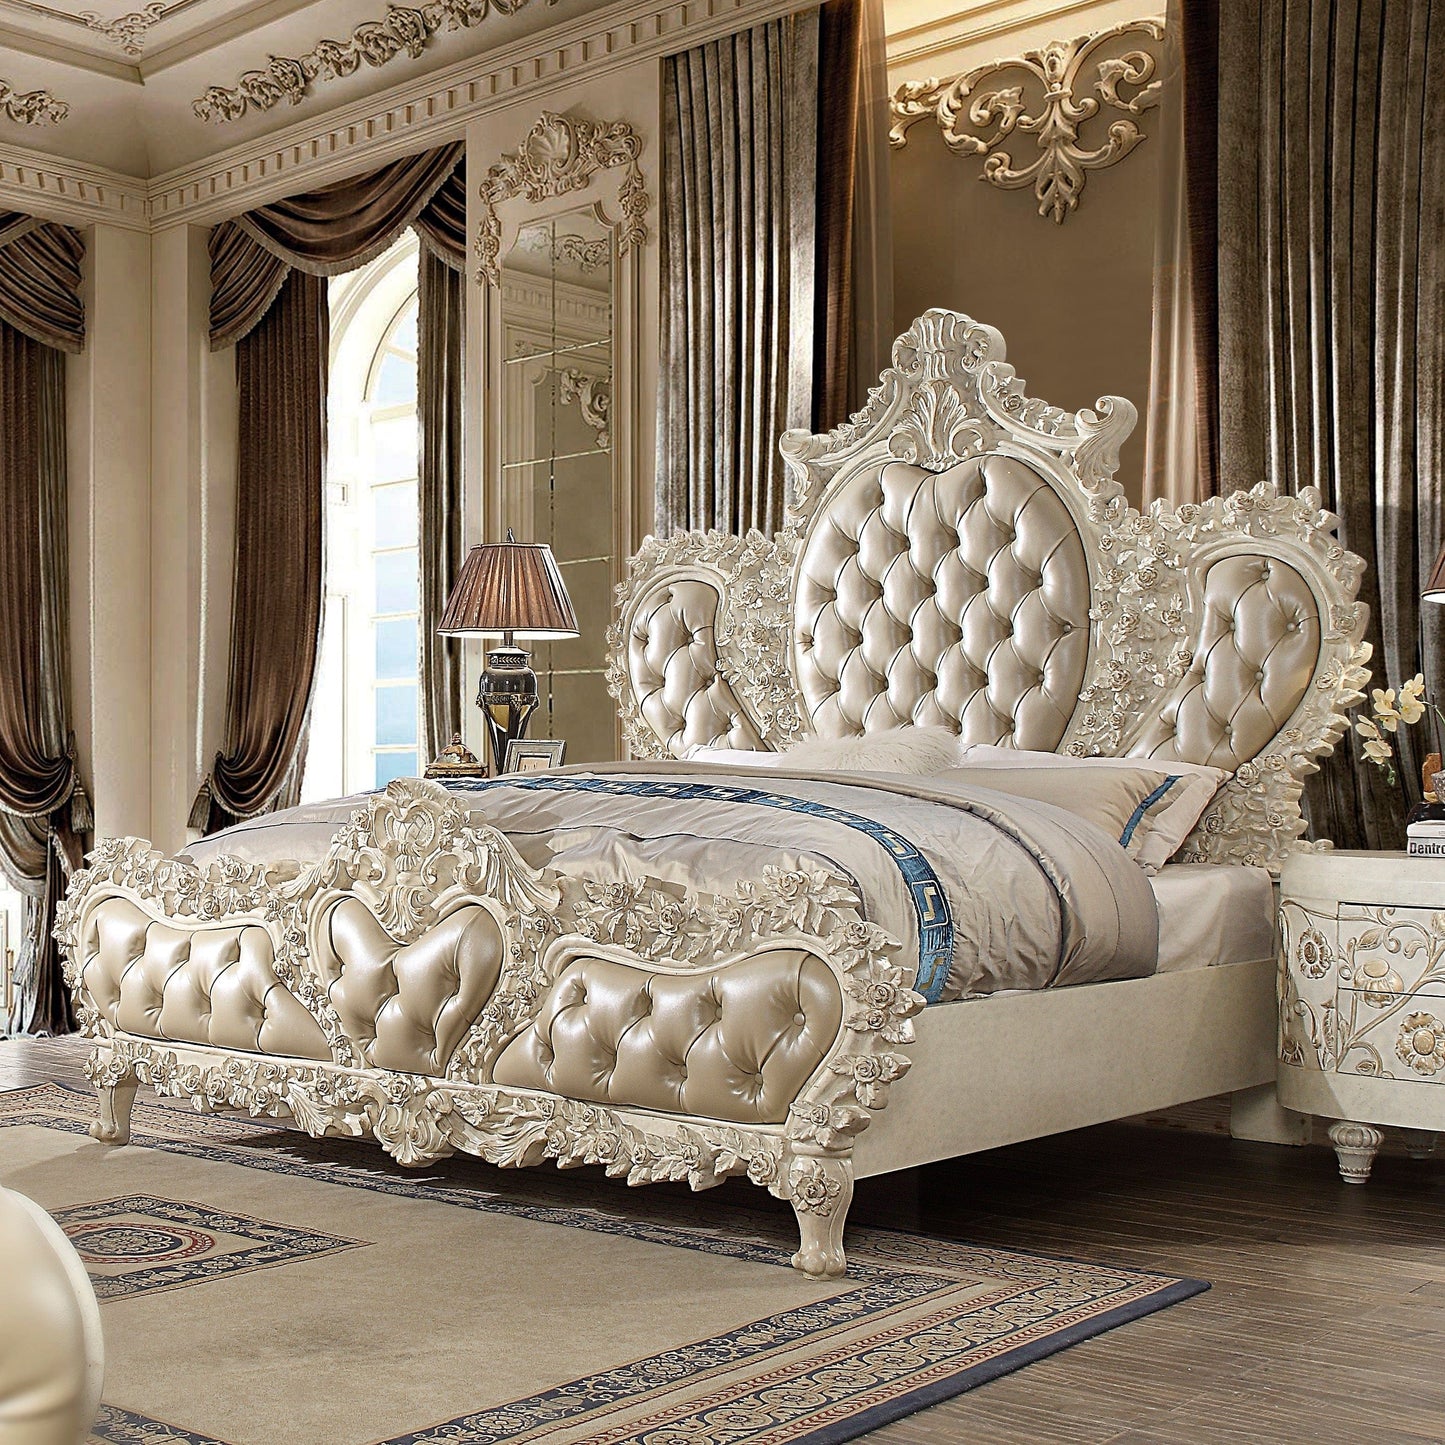 Carved Luxury Tufted Bed Homey DesignHD-8030 - Ck King